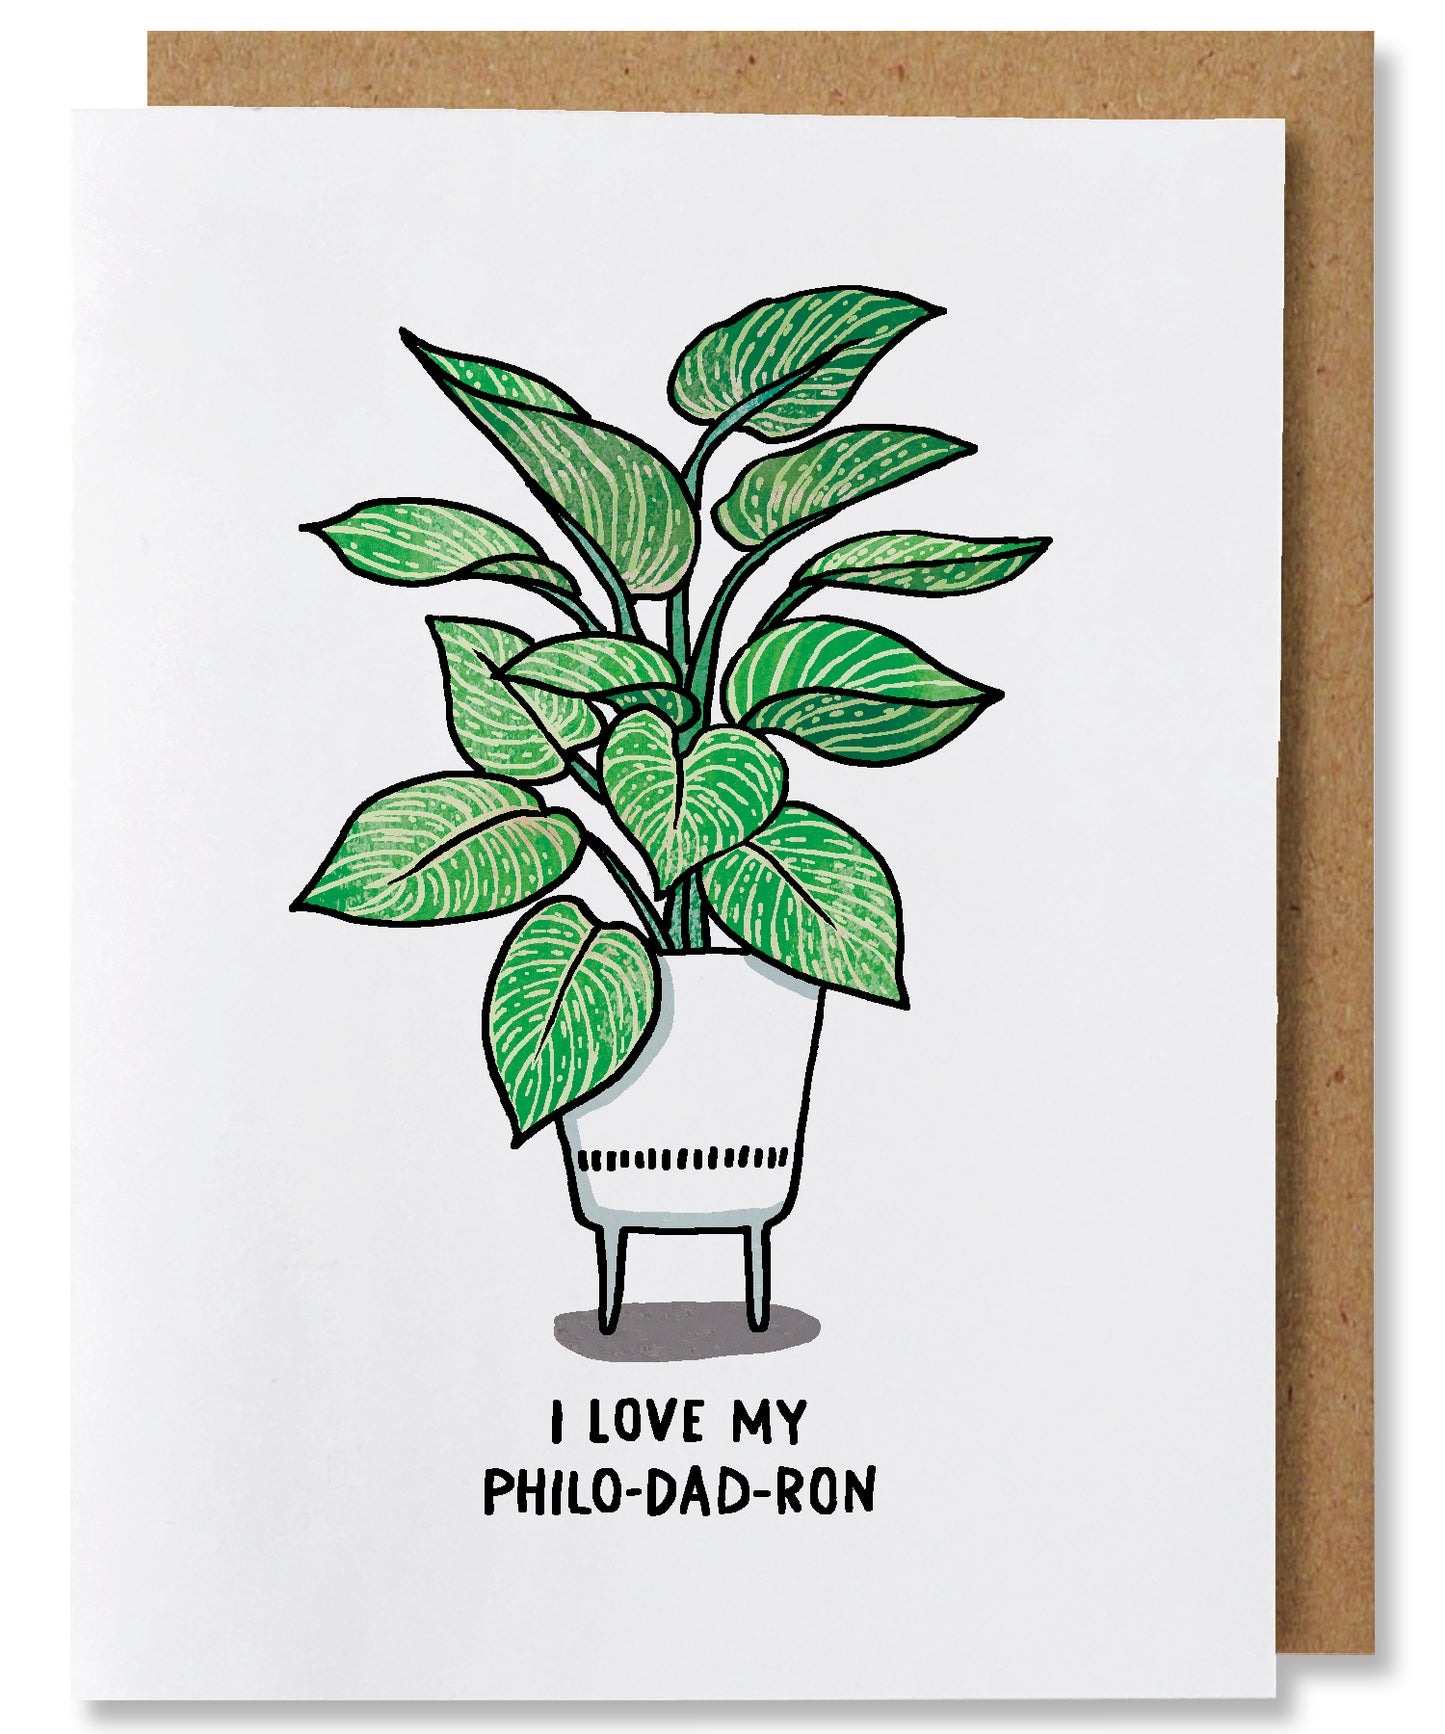 I Love My Philo-dad-ron is a white ground greeting card that features a philodendron birkin plant potted in a white planter with legs. The words beneath say "I love my Philo-Dad-ron". This card is paired with a brown kraft envelope